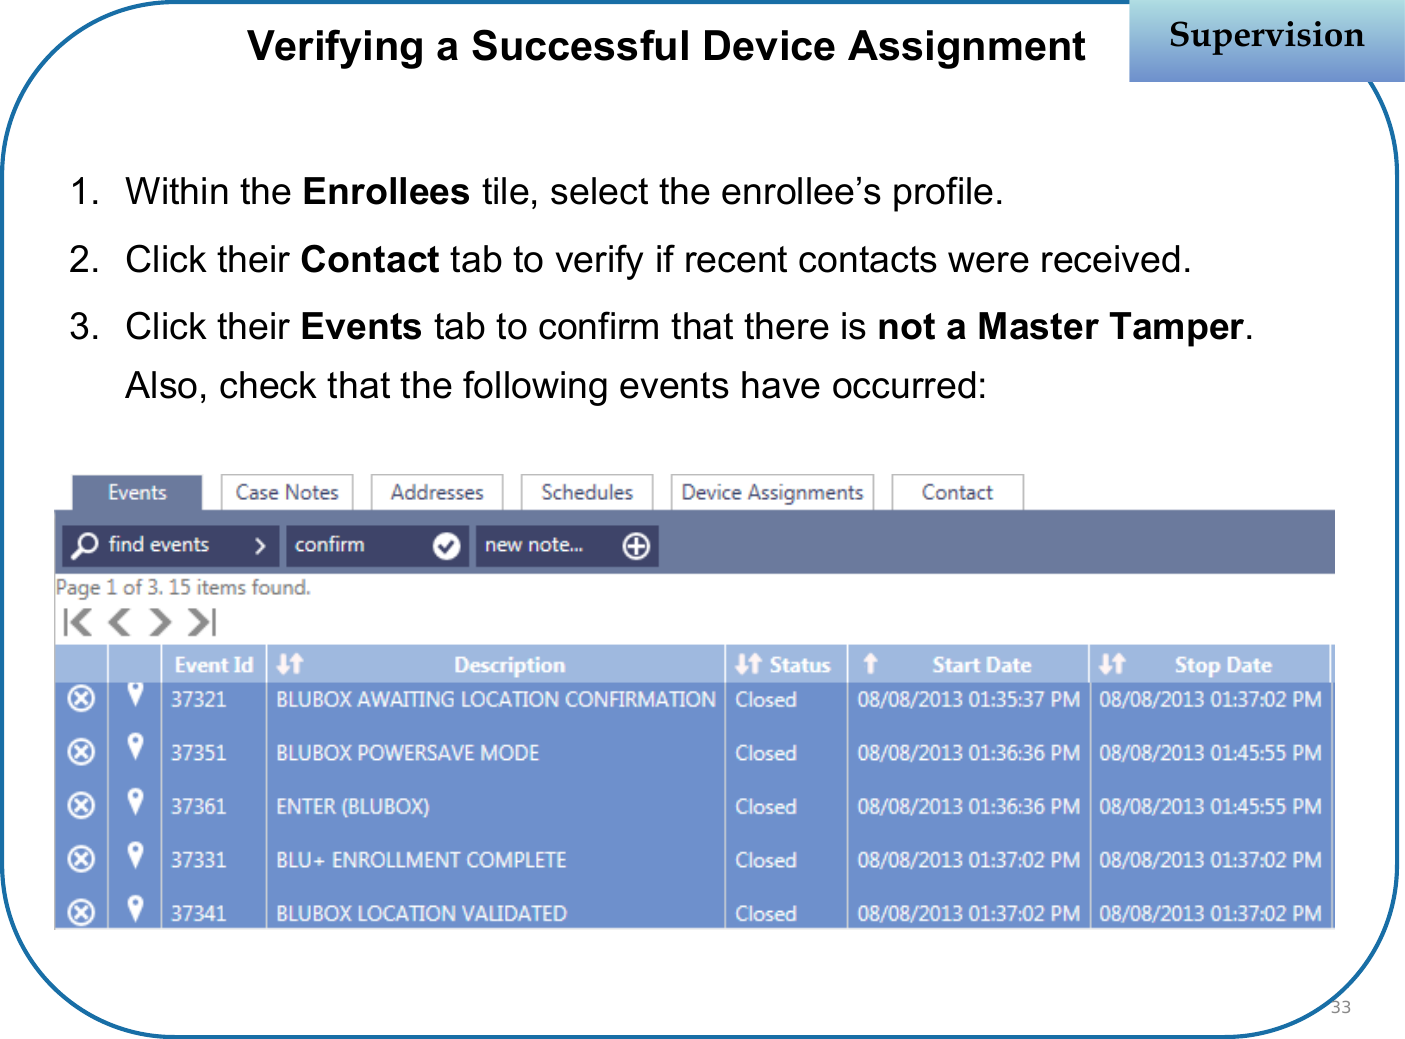 Verifying a Successful Device Assignment1. Within the Enrollees tile, select the enrollee’s profile.2. Click their Contact tab to verify if recent contacts were received.3. Click their Events tab to confirm that there is not a Master Tamper. Also, check that the following events have occurred:SupervisionSupervision33